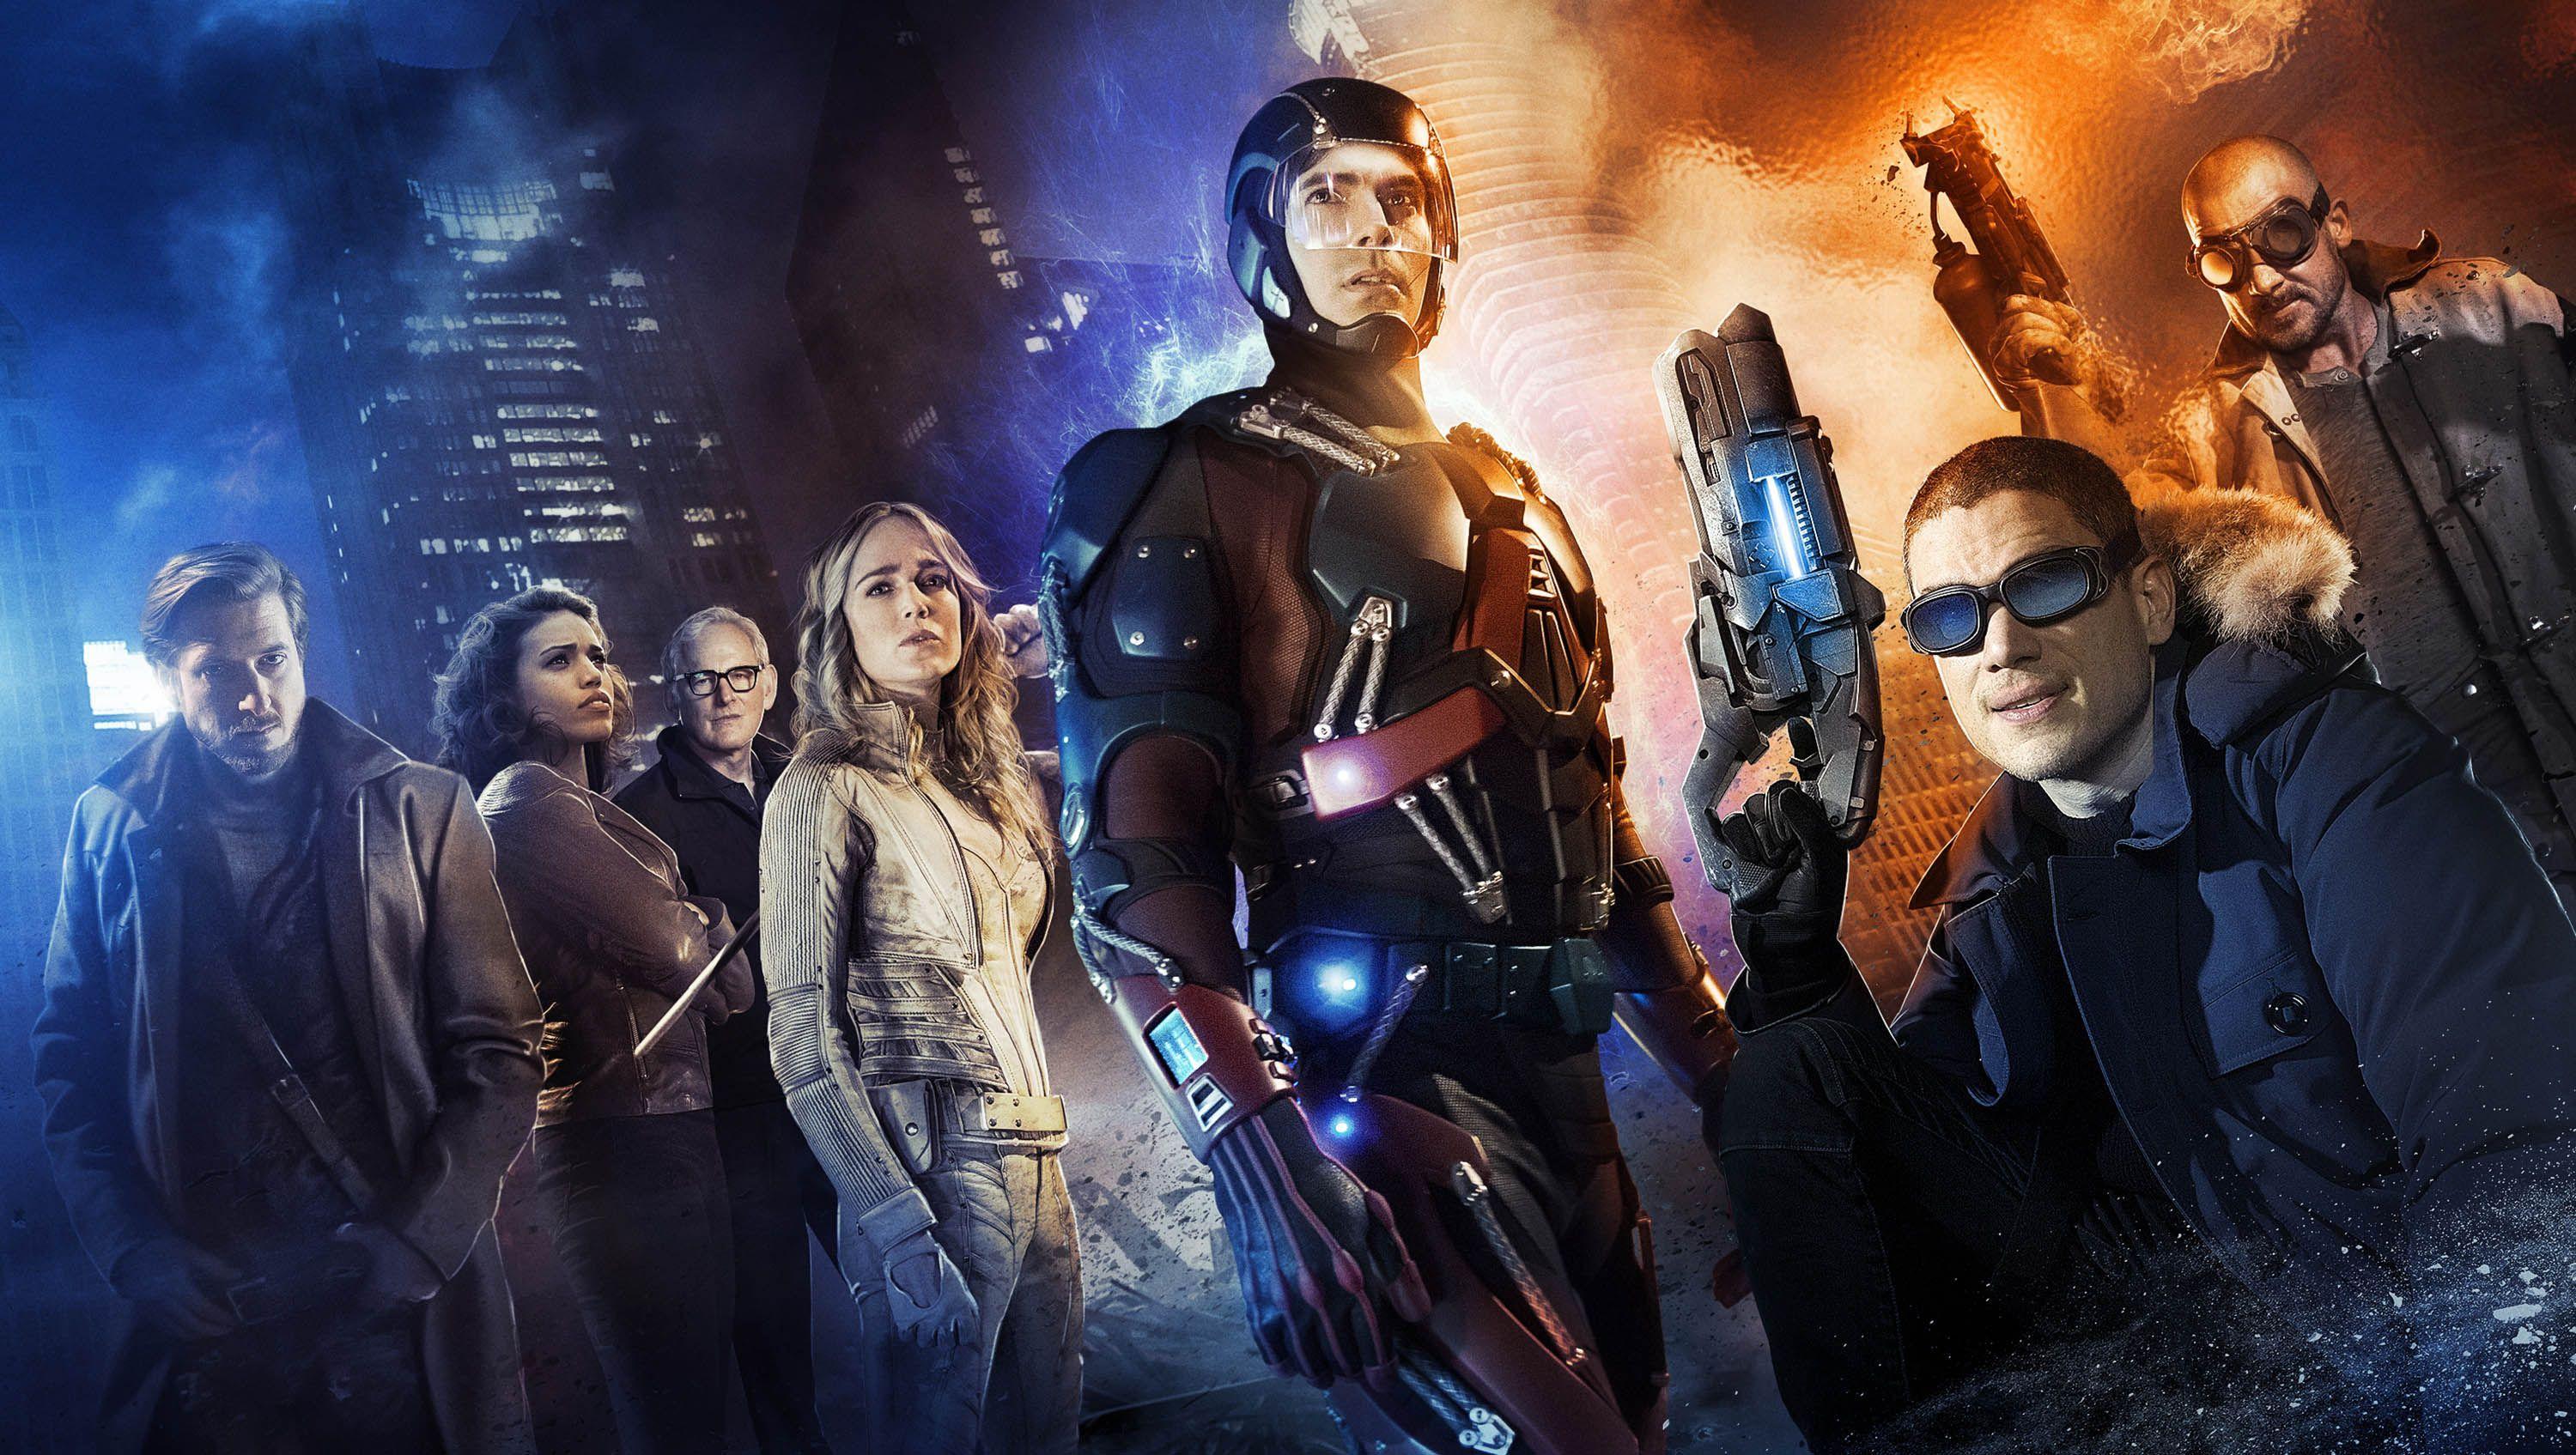 DC Legends of Tomorrow Wallpaper Free DC Legends of Tomorrow Background